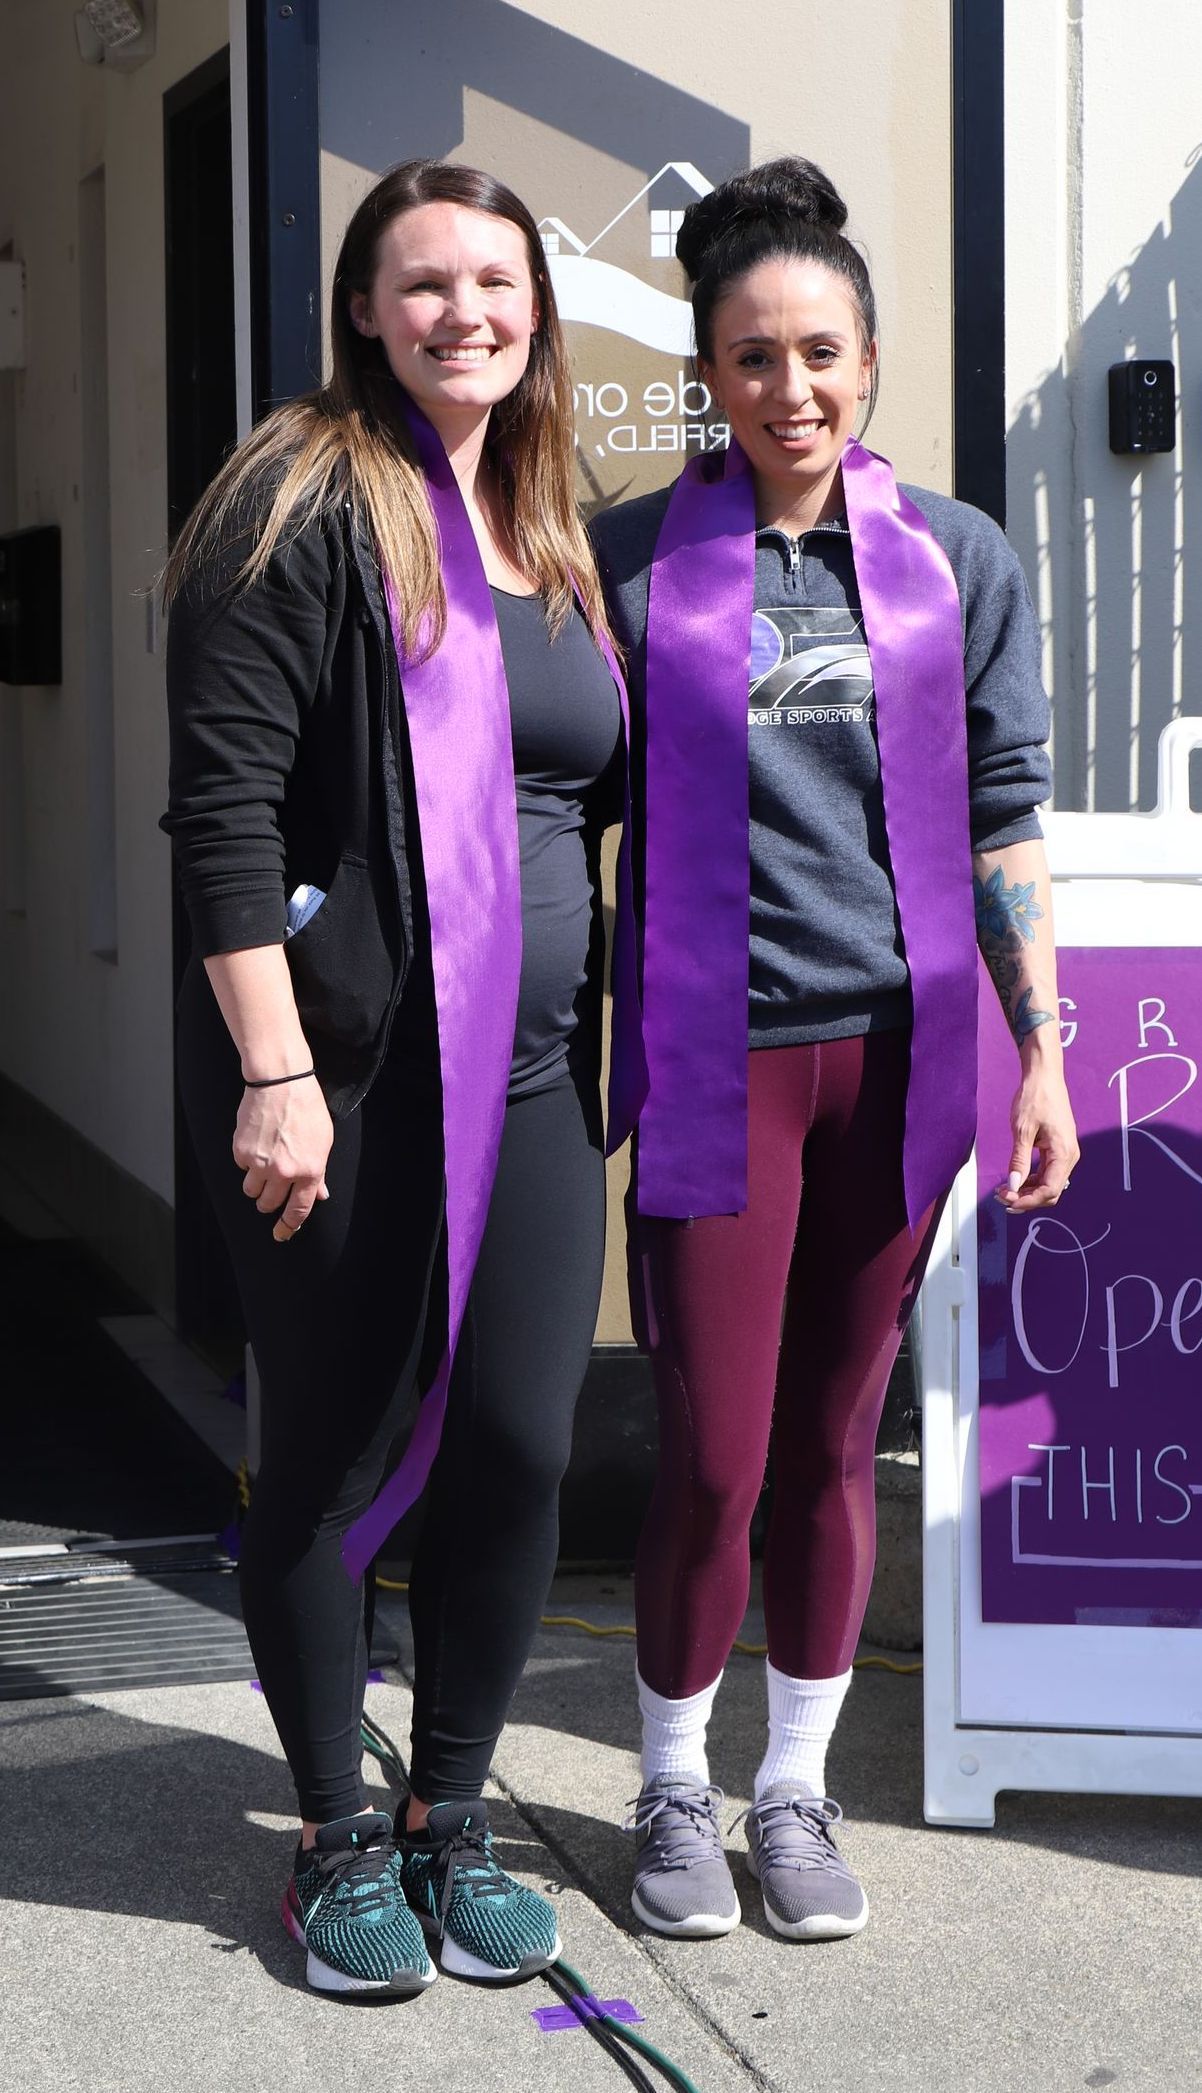 Two women wearing purple sashes are posing for a picture.